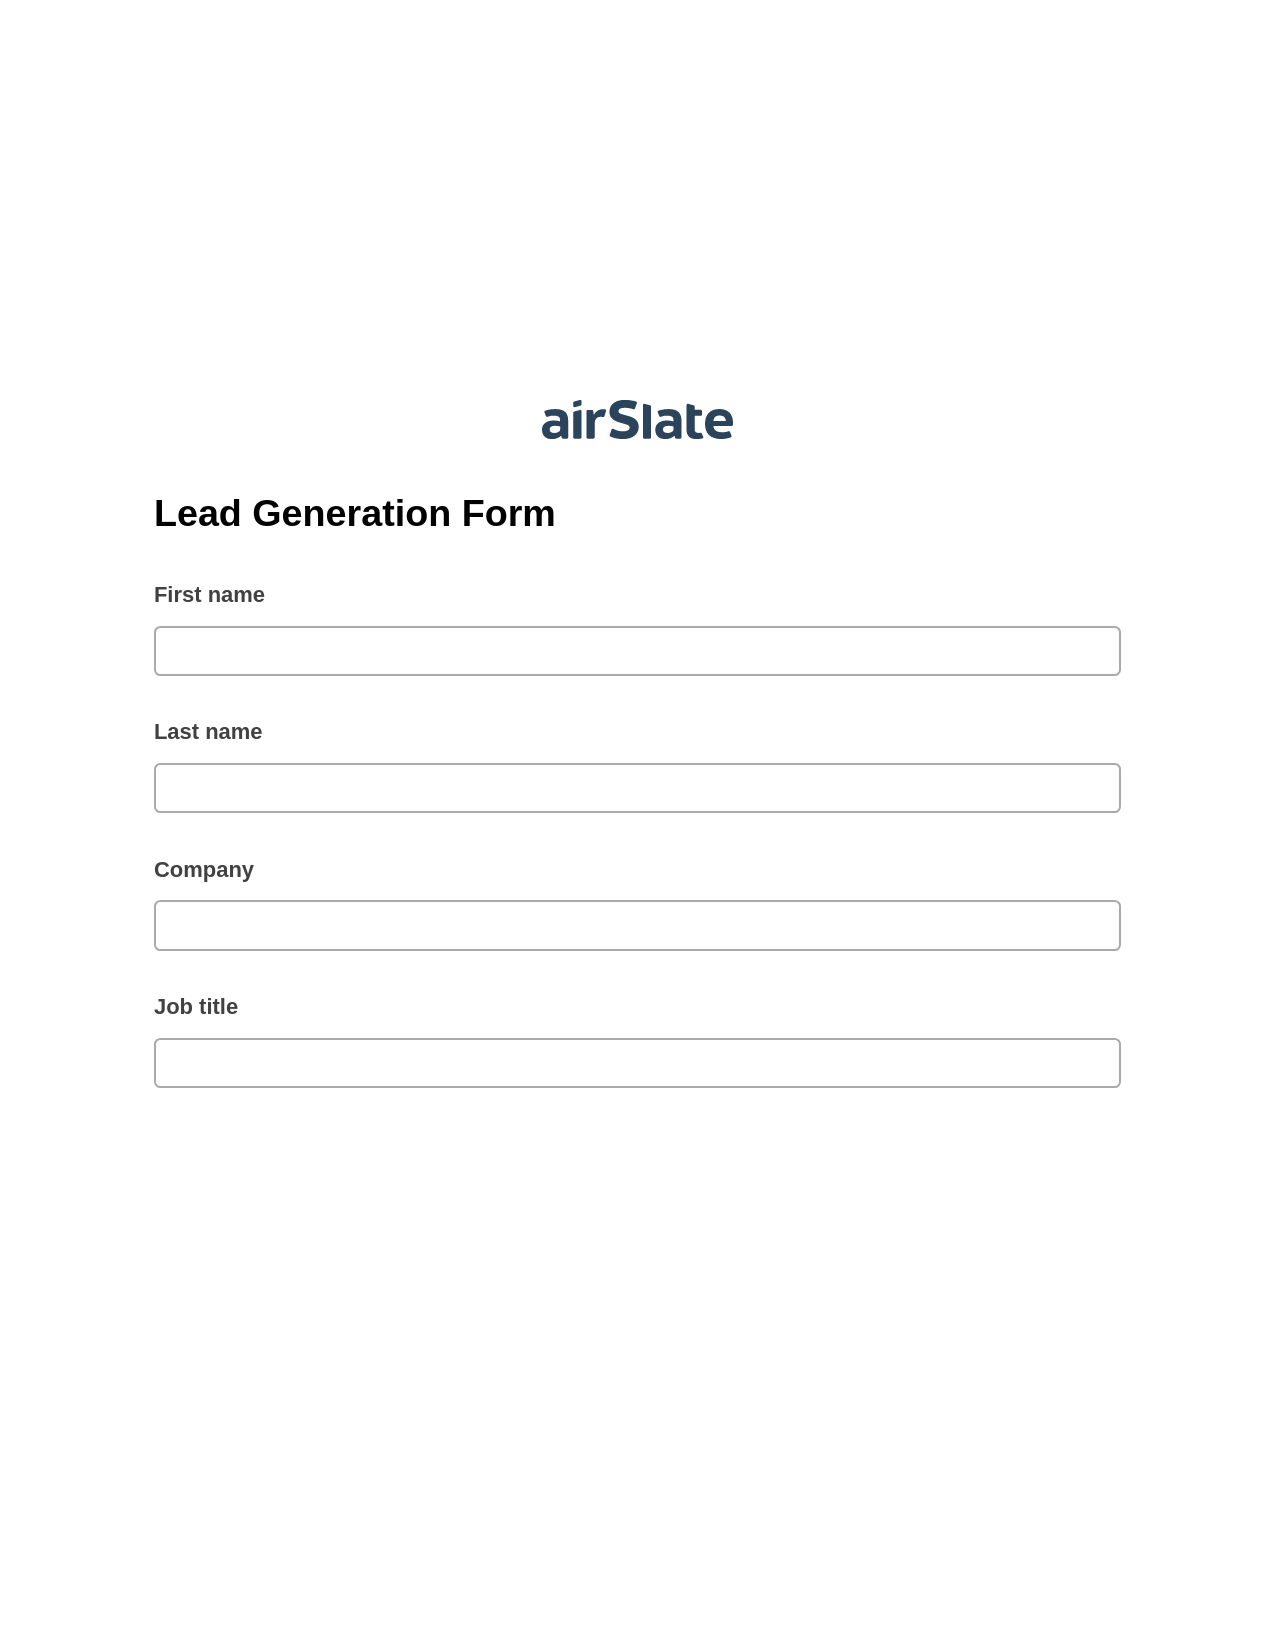 Multirole Lead Generation Form Pre-fill from Google Sheets Bot, Add Tags to Slate Bot, Archive to Box Bot